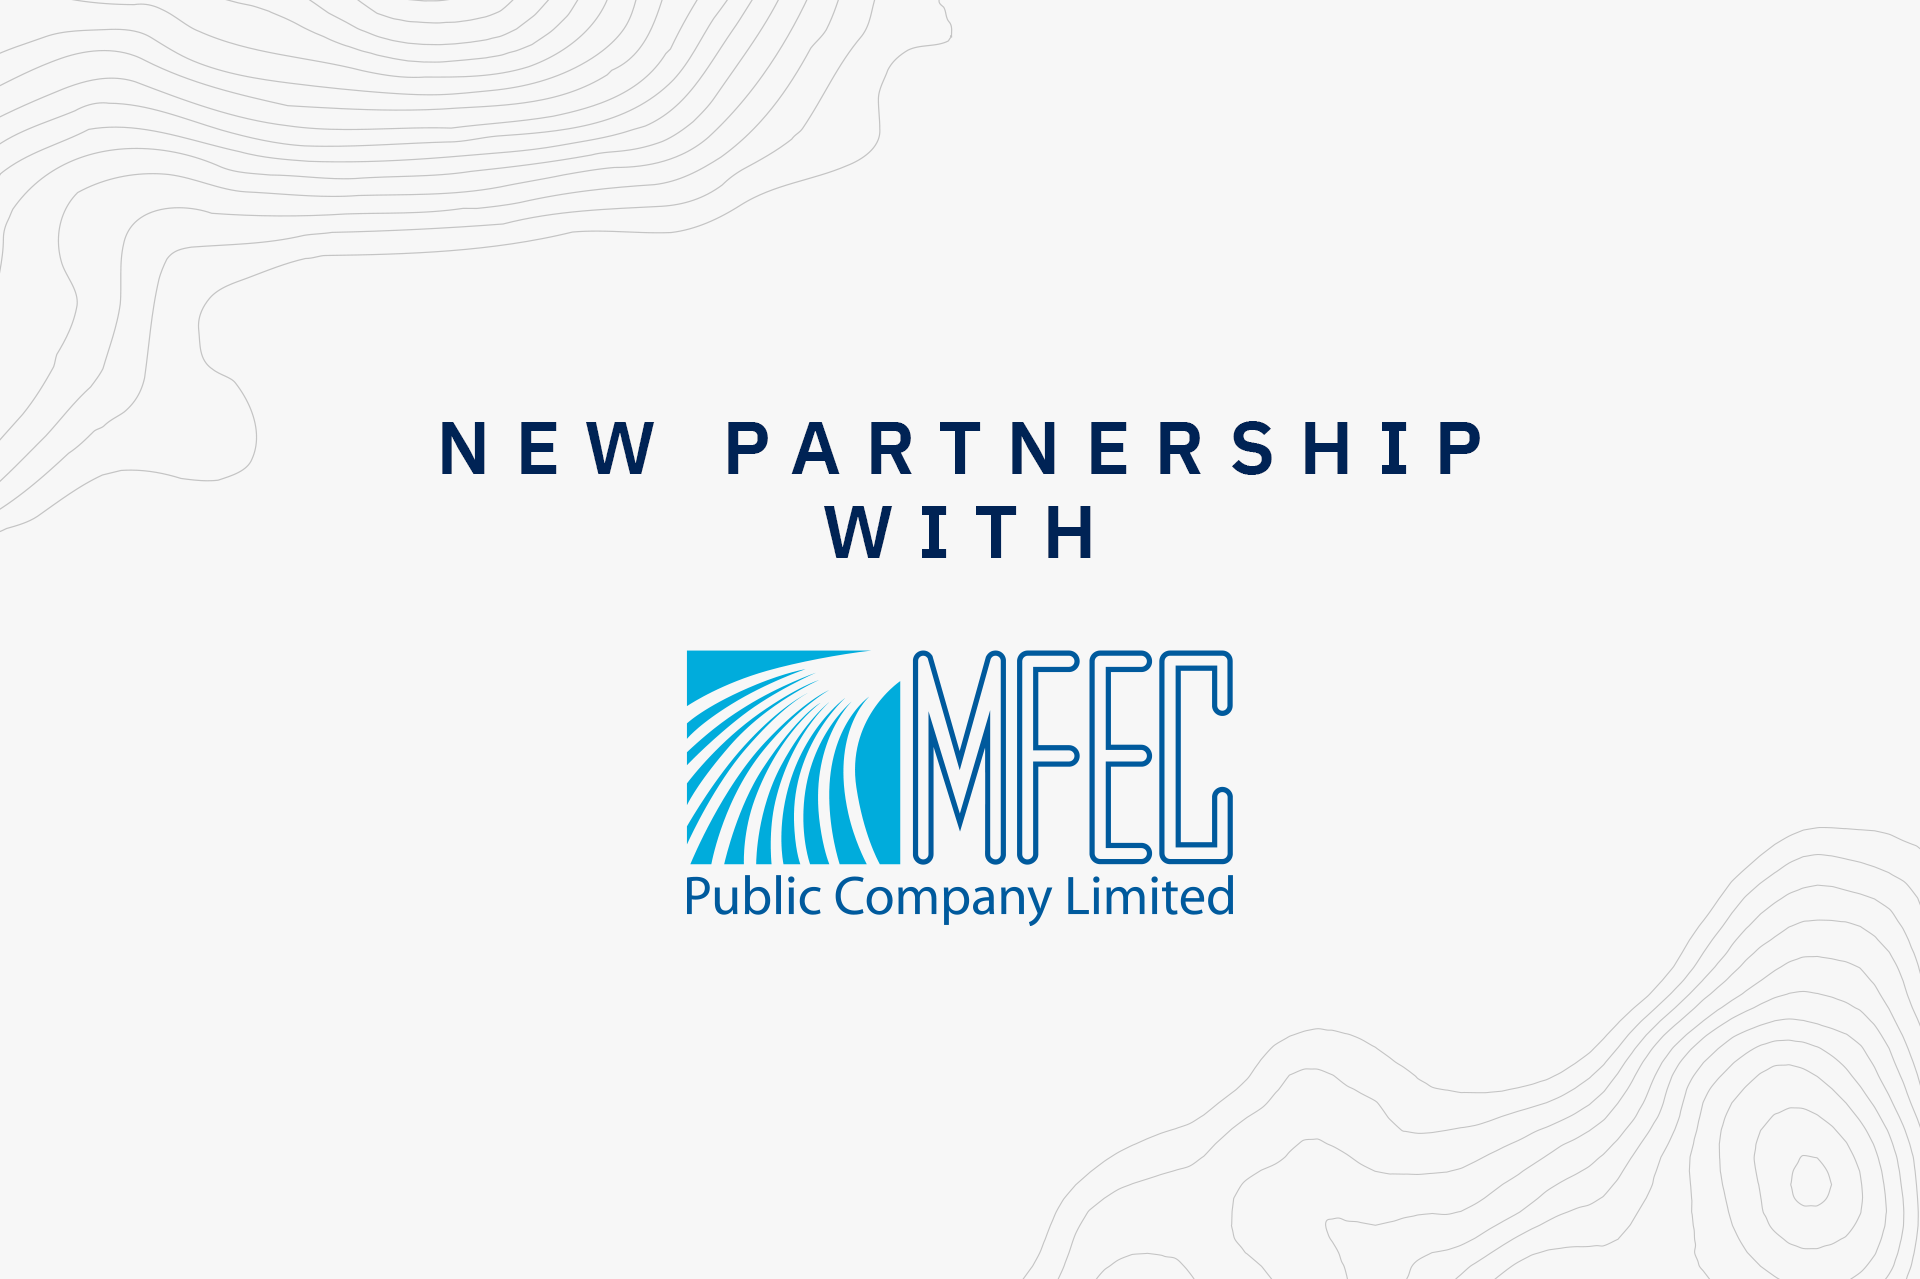 Contour and MFEC partner to accelerate the digitisation of trade finance in Thailand